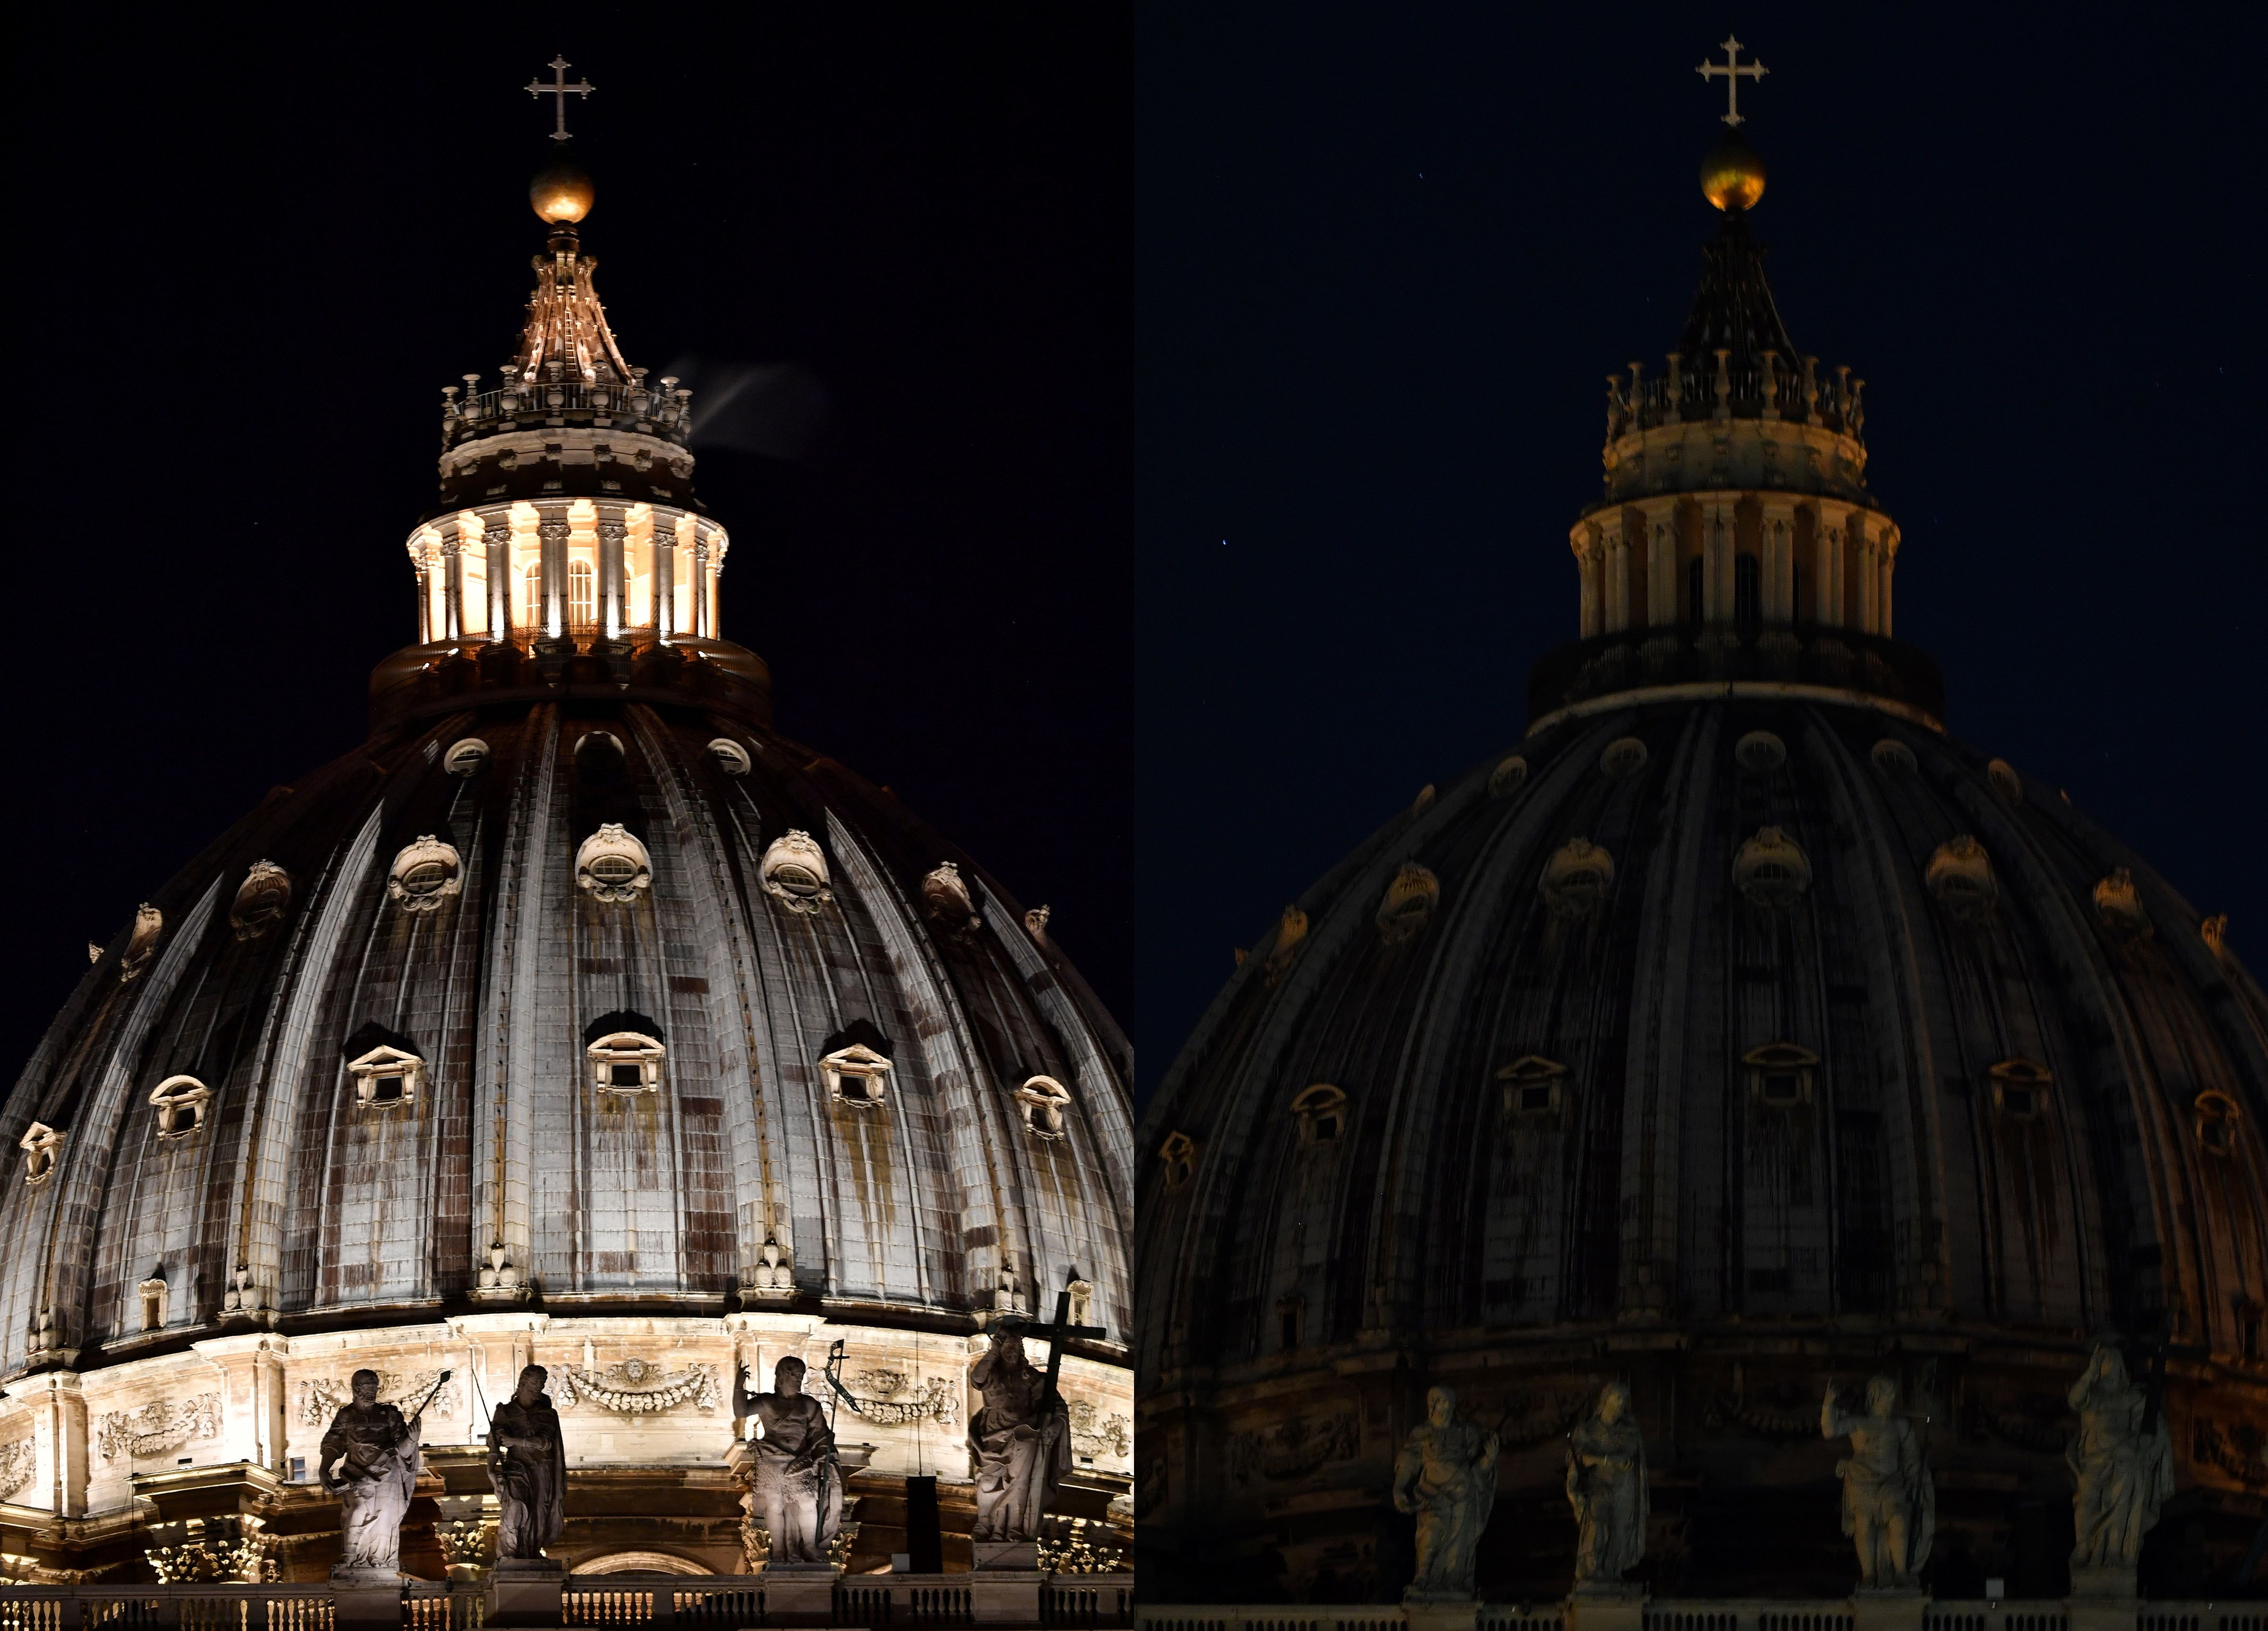 The dome of St. Peter's basilica before and after being plunged into darkness for the Earth Hour environmental campaign in the Vatican.